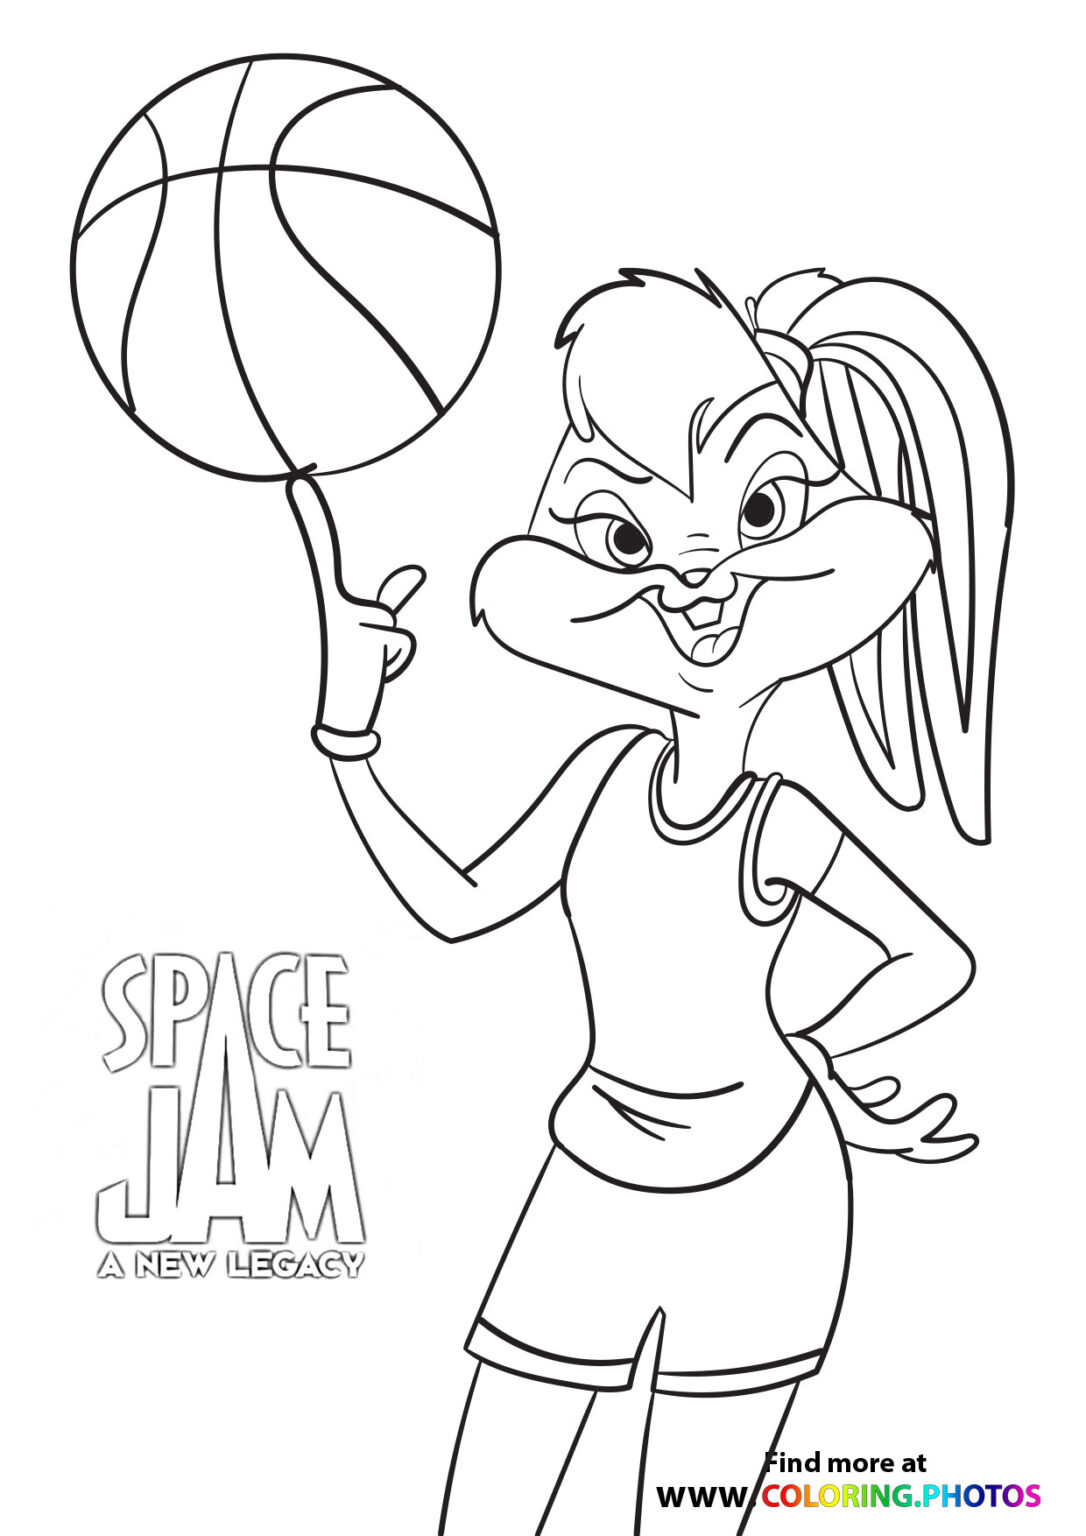 Wet-Fire Goon Squad - Space Jam: A new legacy - Coloring Pages for kids